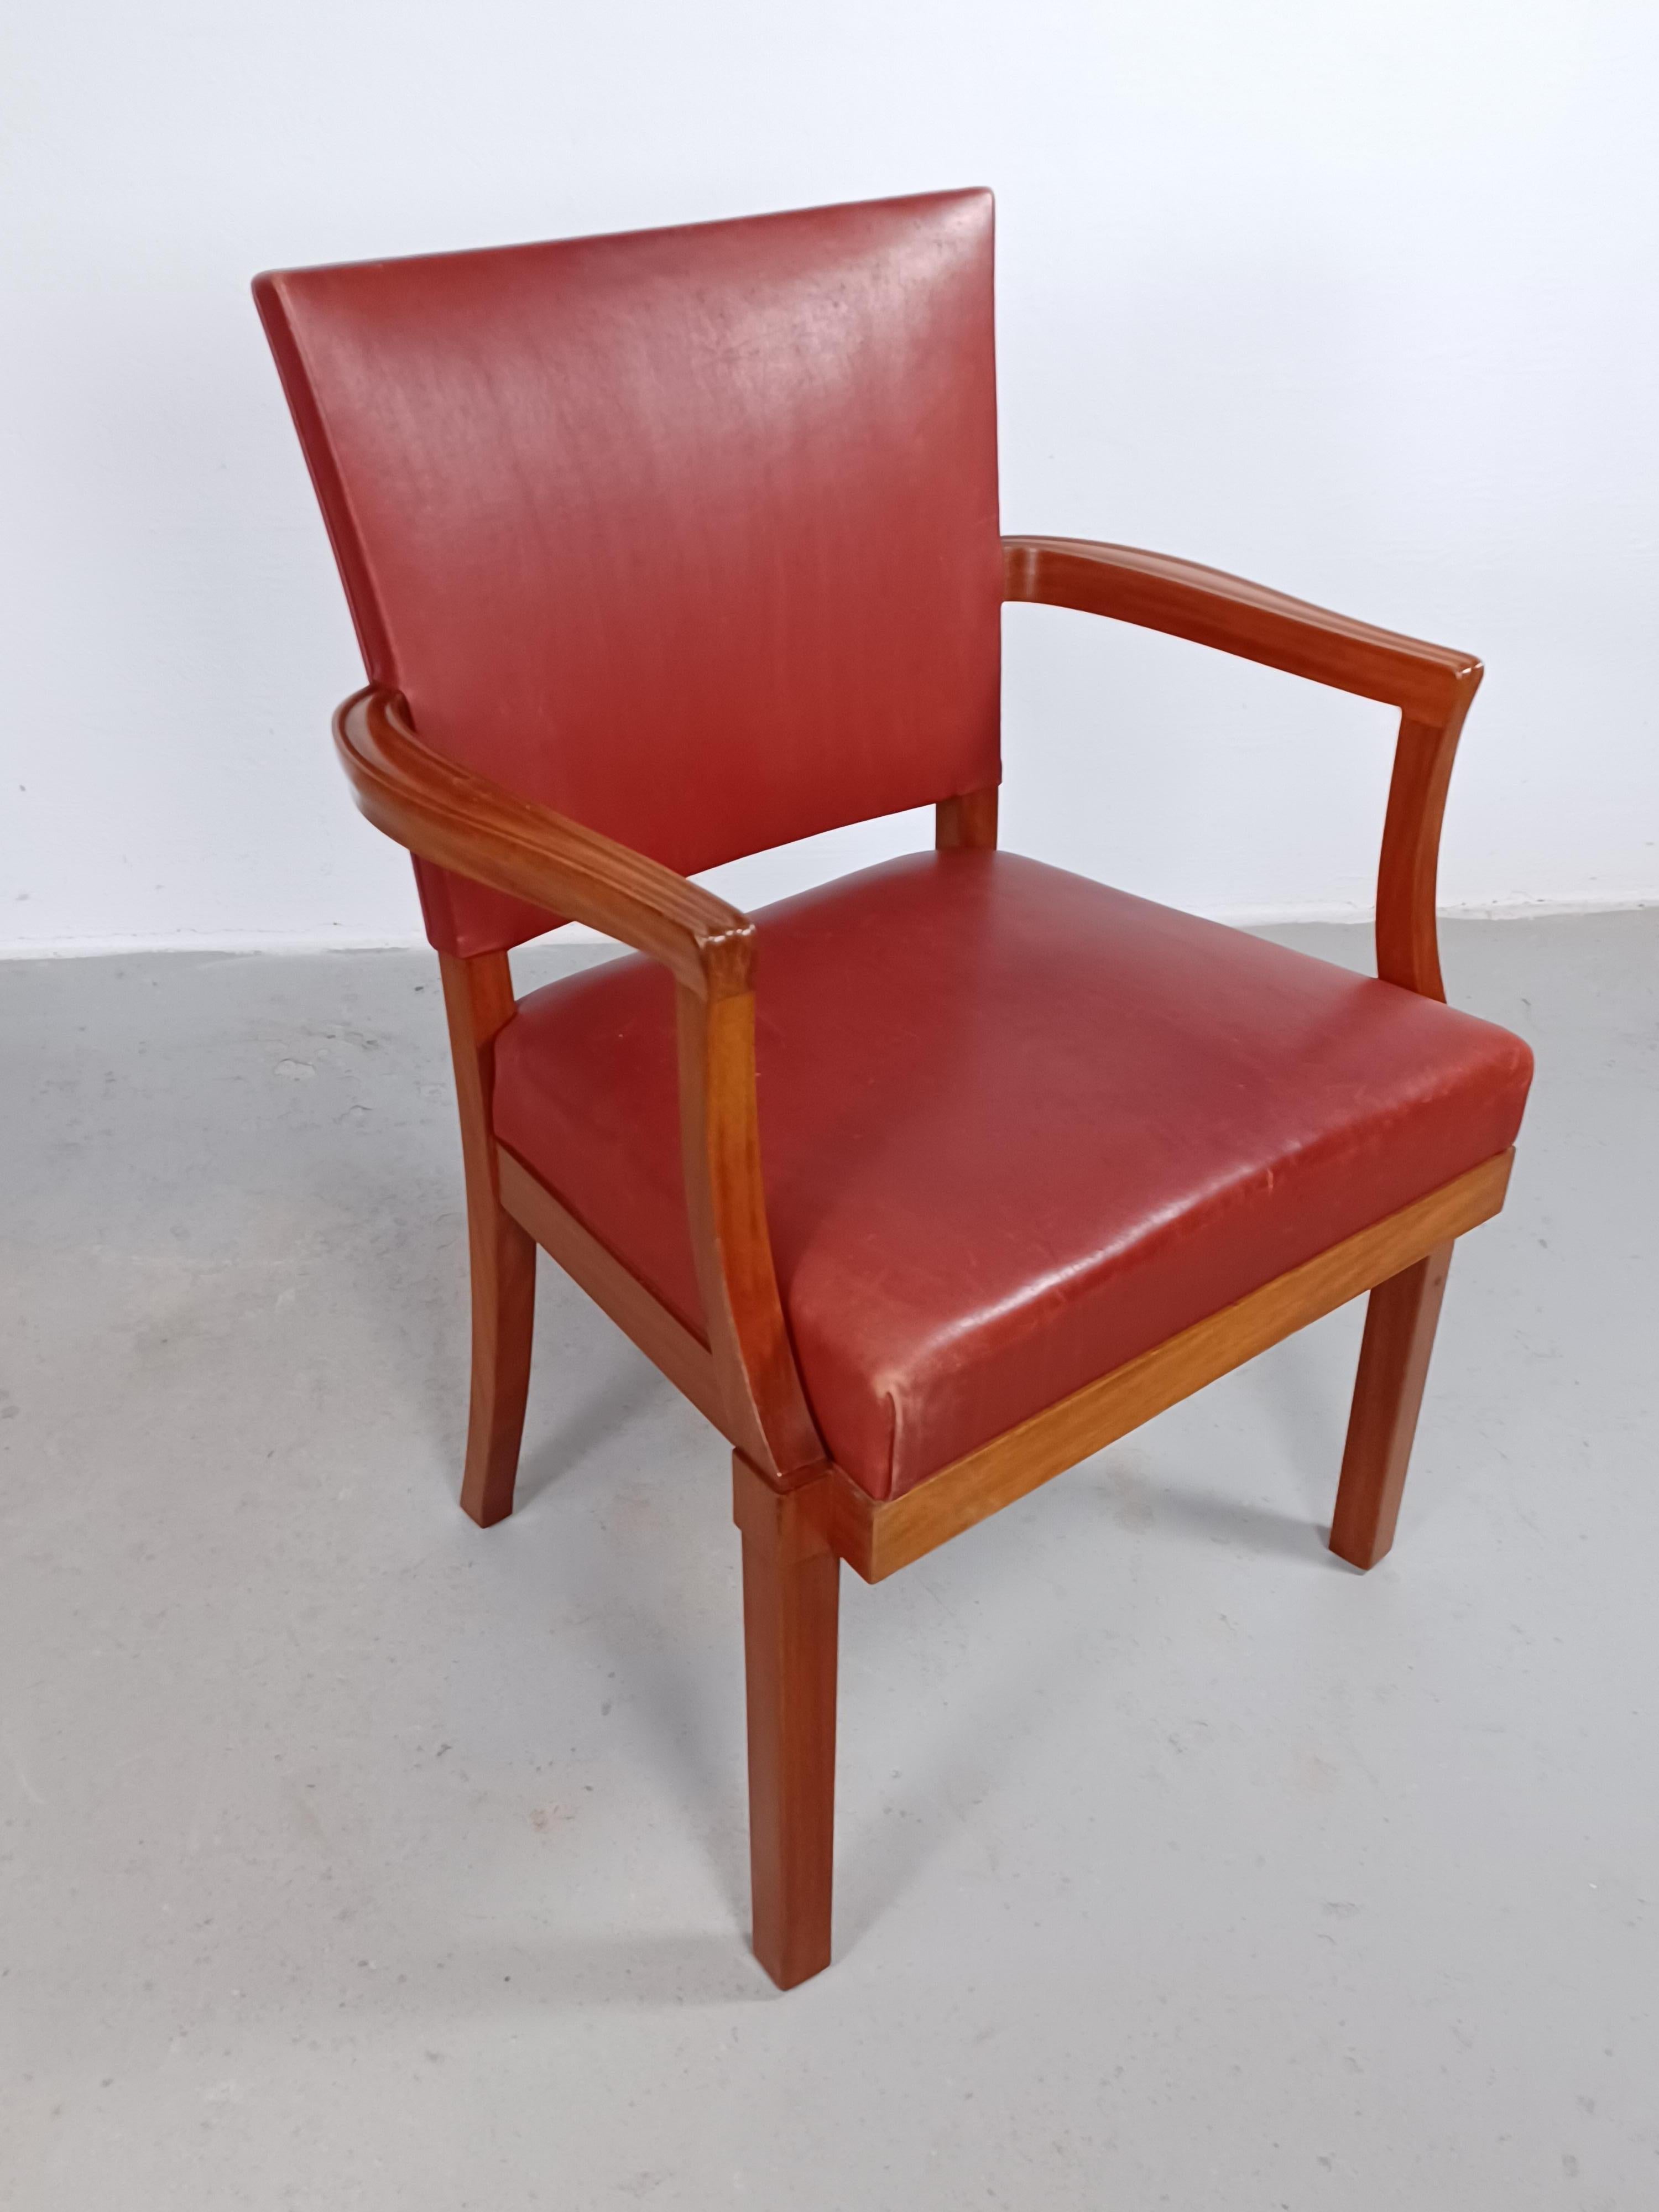 1935 Set of Two Restored Kaare Klint Barcelona or The Red Chair by Rud Rasmussen For Sale 3